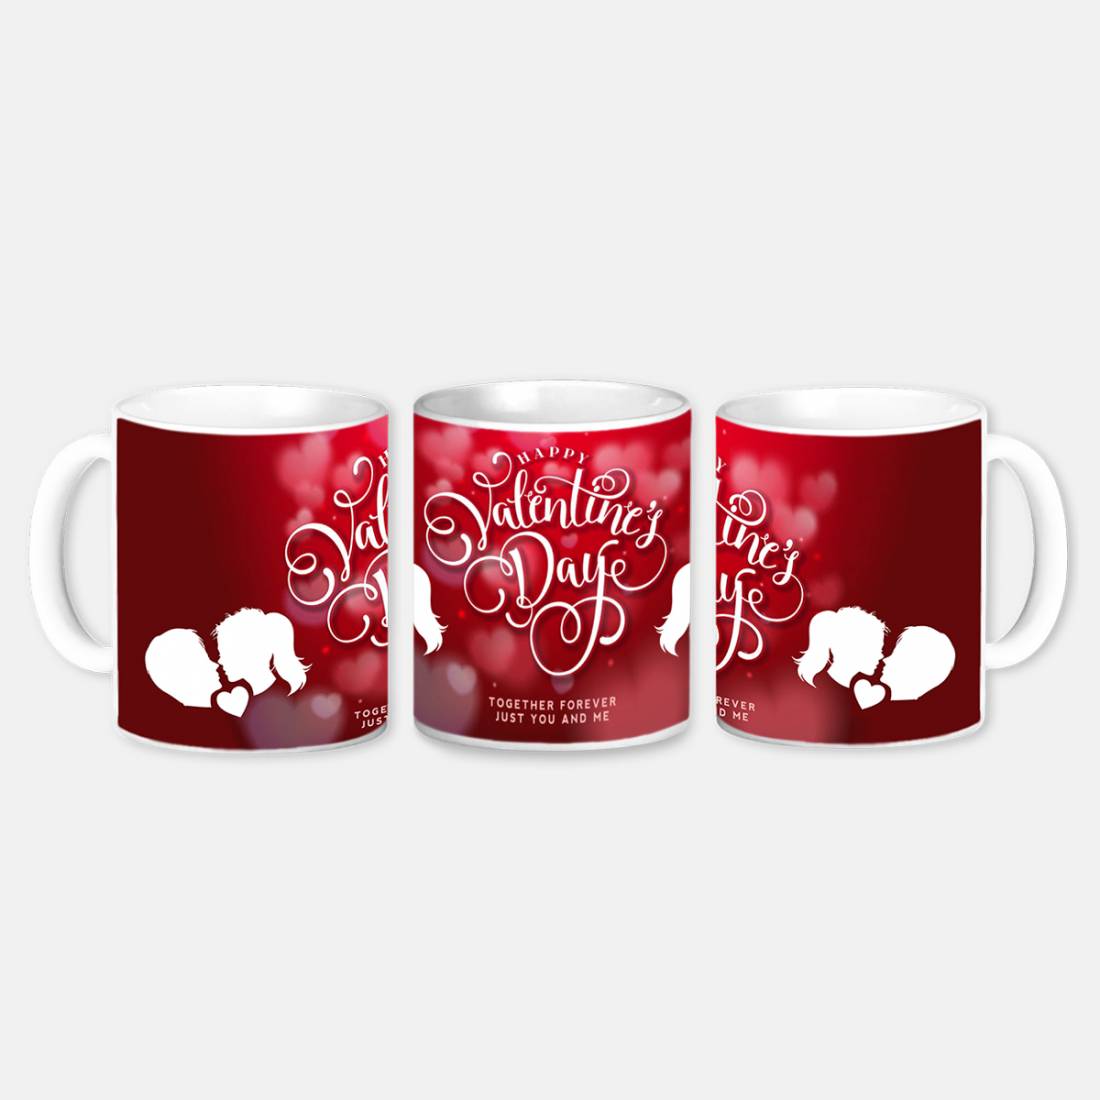 Dreamliveproducts Printed Coffee Valentine Gift,Birthday Gift,Boyfriend And  Girl Friends (V72) Ceramic Coffee Mug Price in India - Buy  Dreamliveproducts Printed Coffee Valentine Gift,Birthday Gift,Boyfriend And  Girl Friends (V72) Ceramic Coffee Mug online